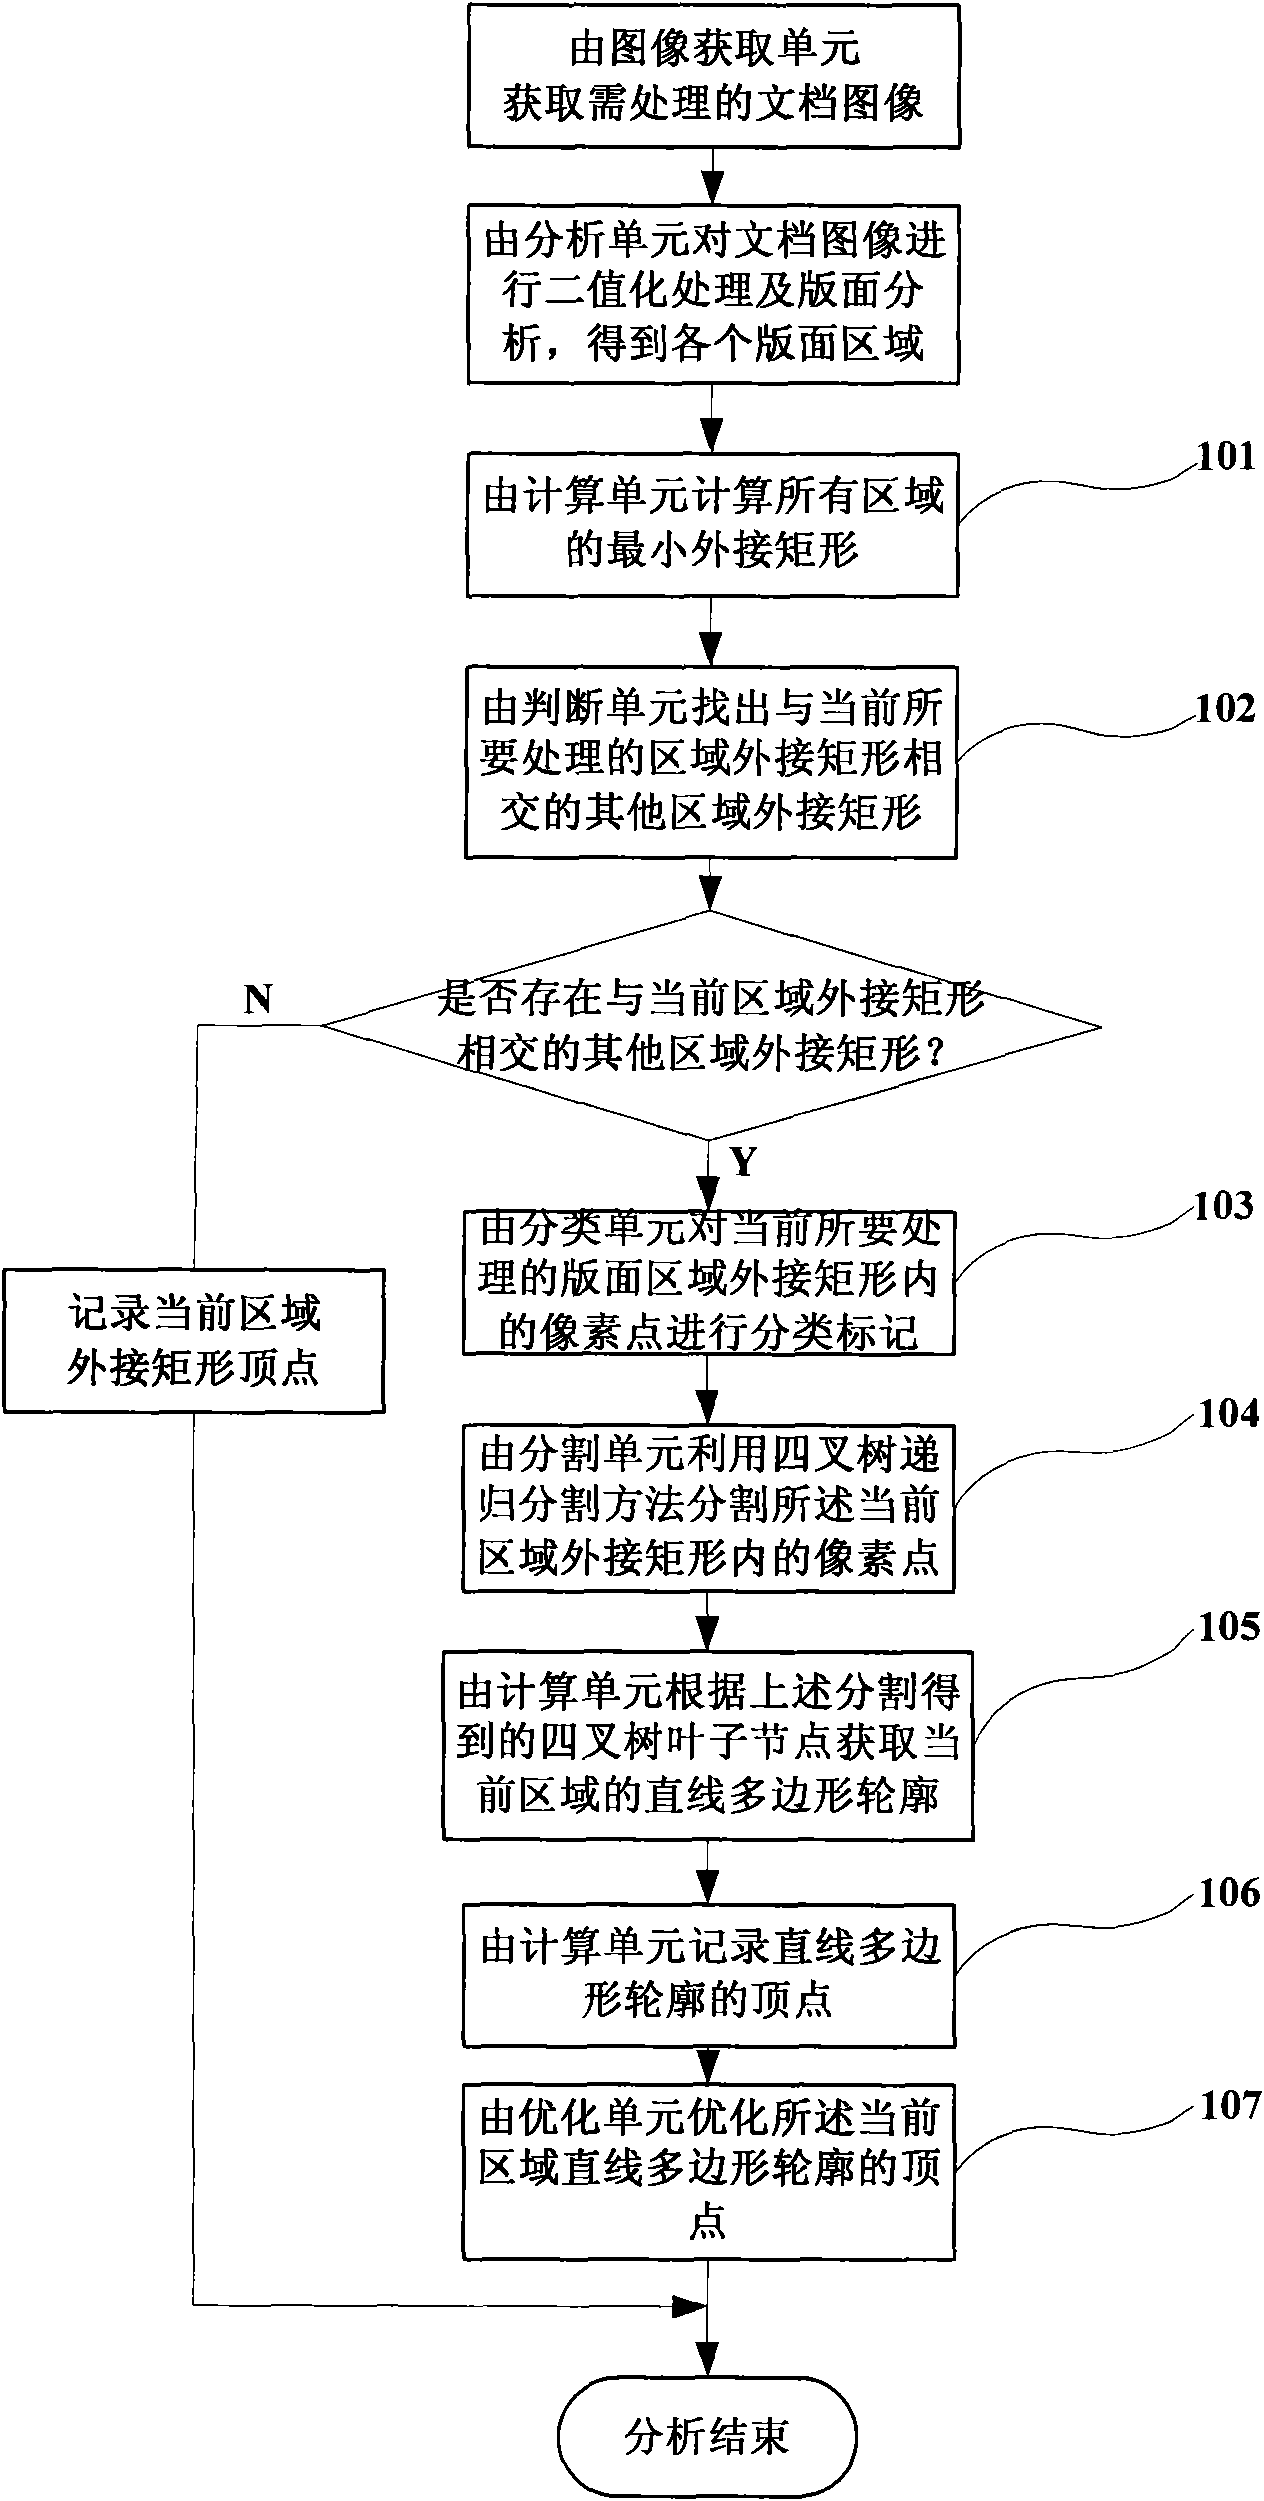 Method for profile analysis in image layout area